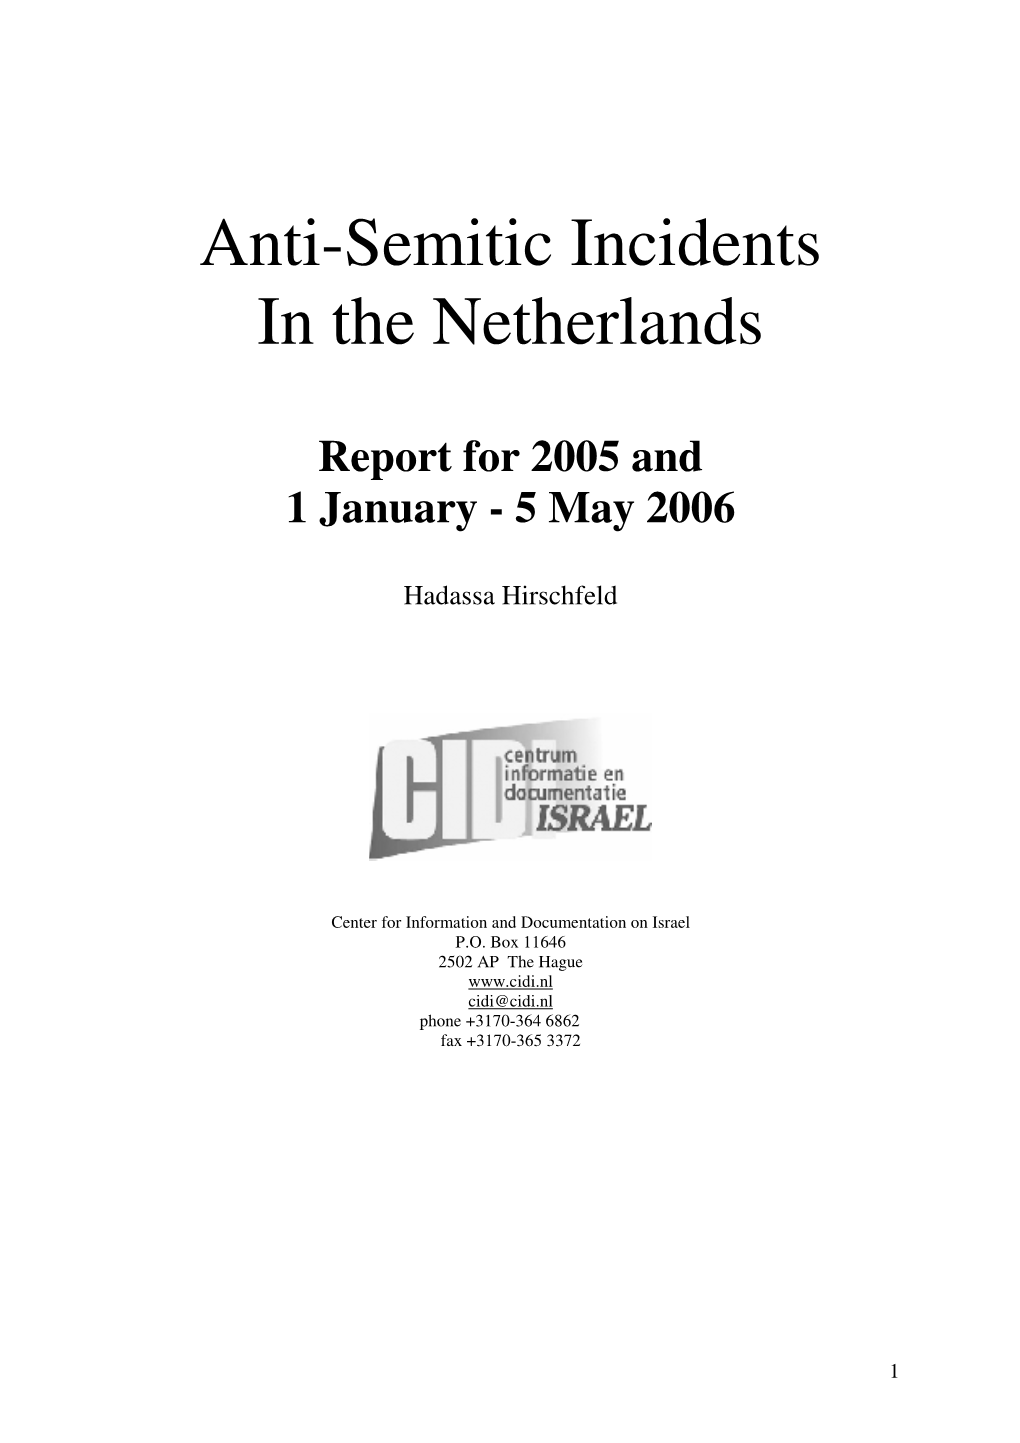 Anti-Semitic Incidents in the Netherlands